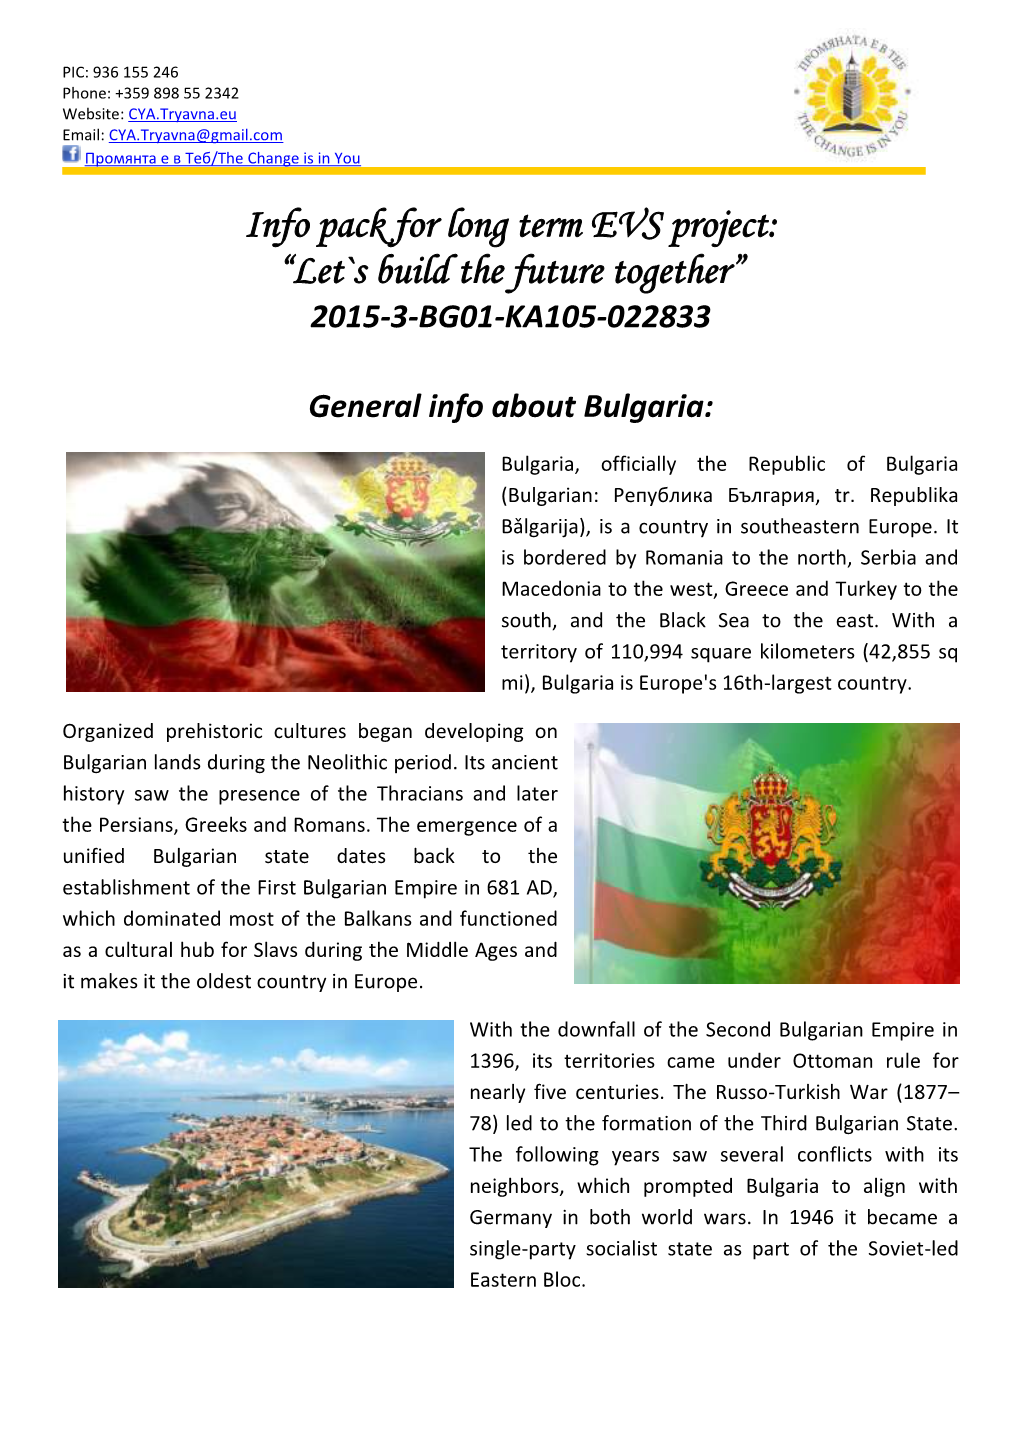 Info Pack for Long Term EVS Project: “Let`S Build the Future Together” 2015-3-BG01-KA105-022833